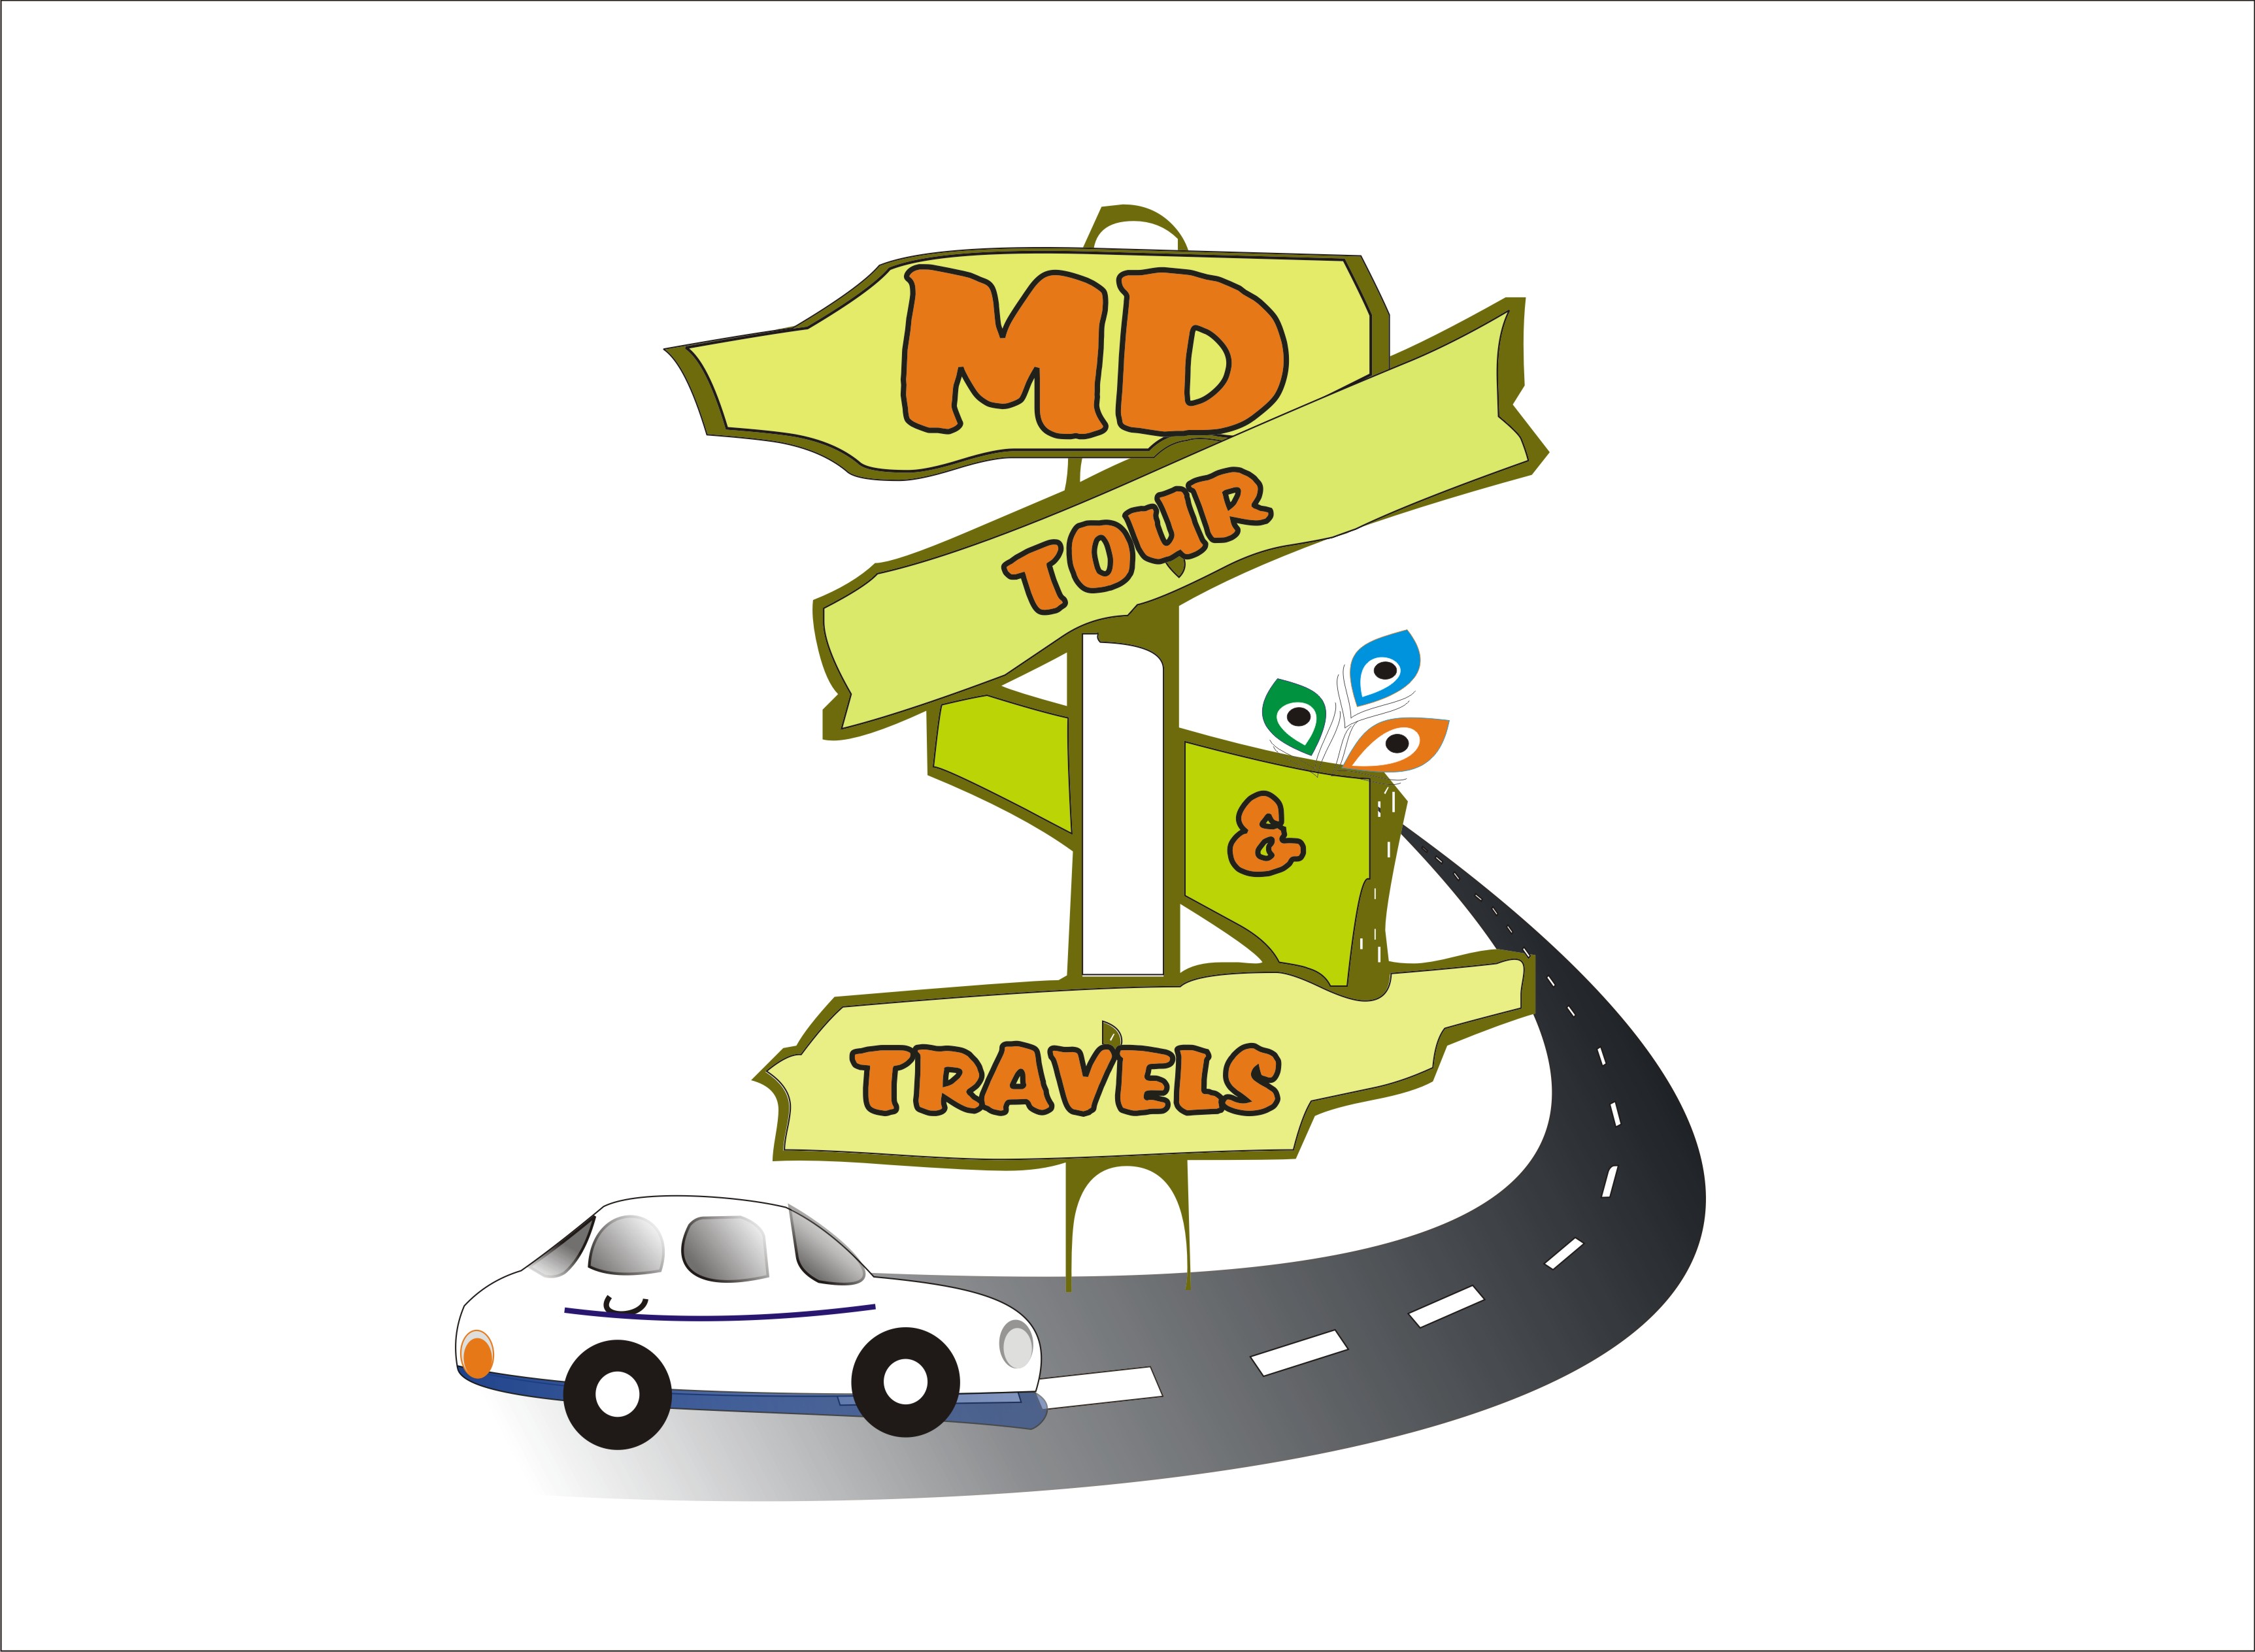 MD Tour Travels